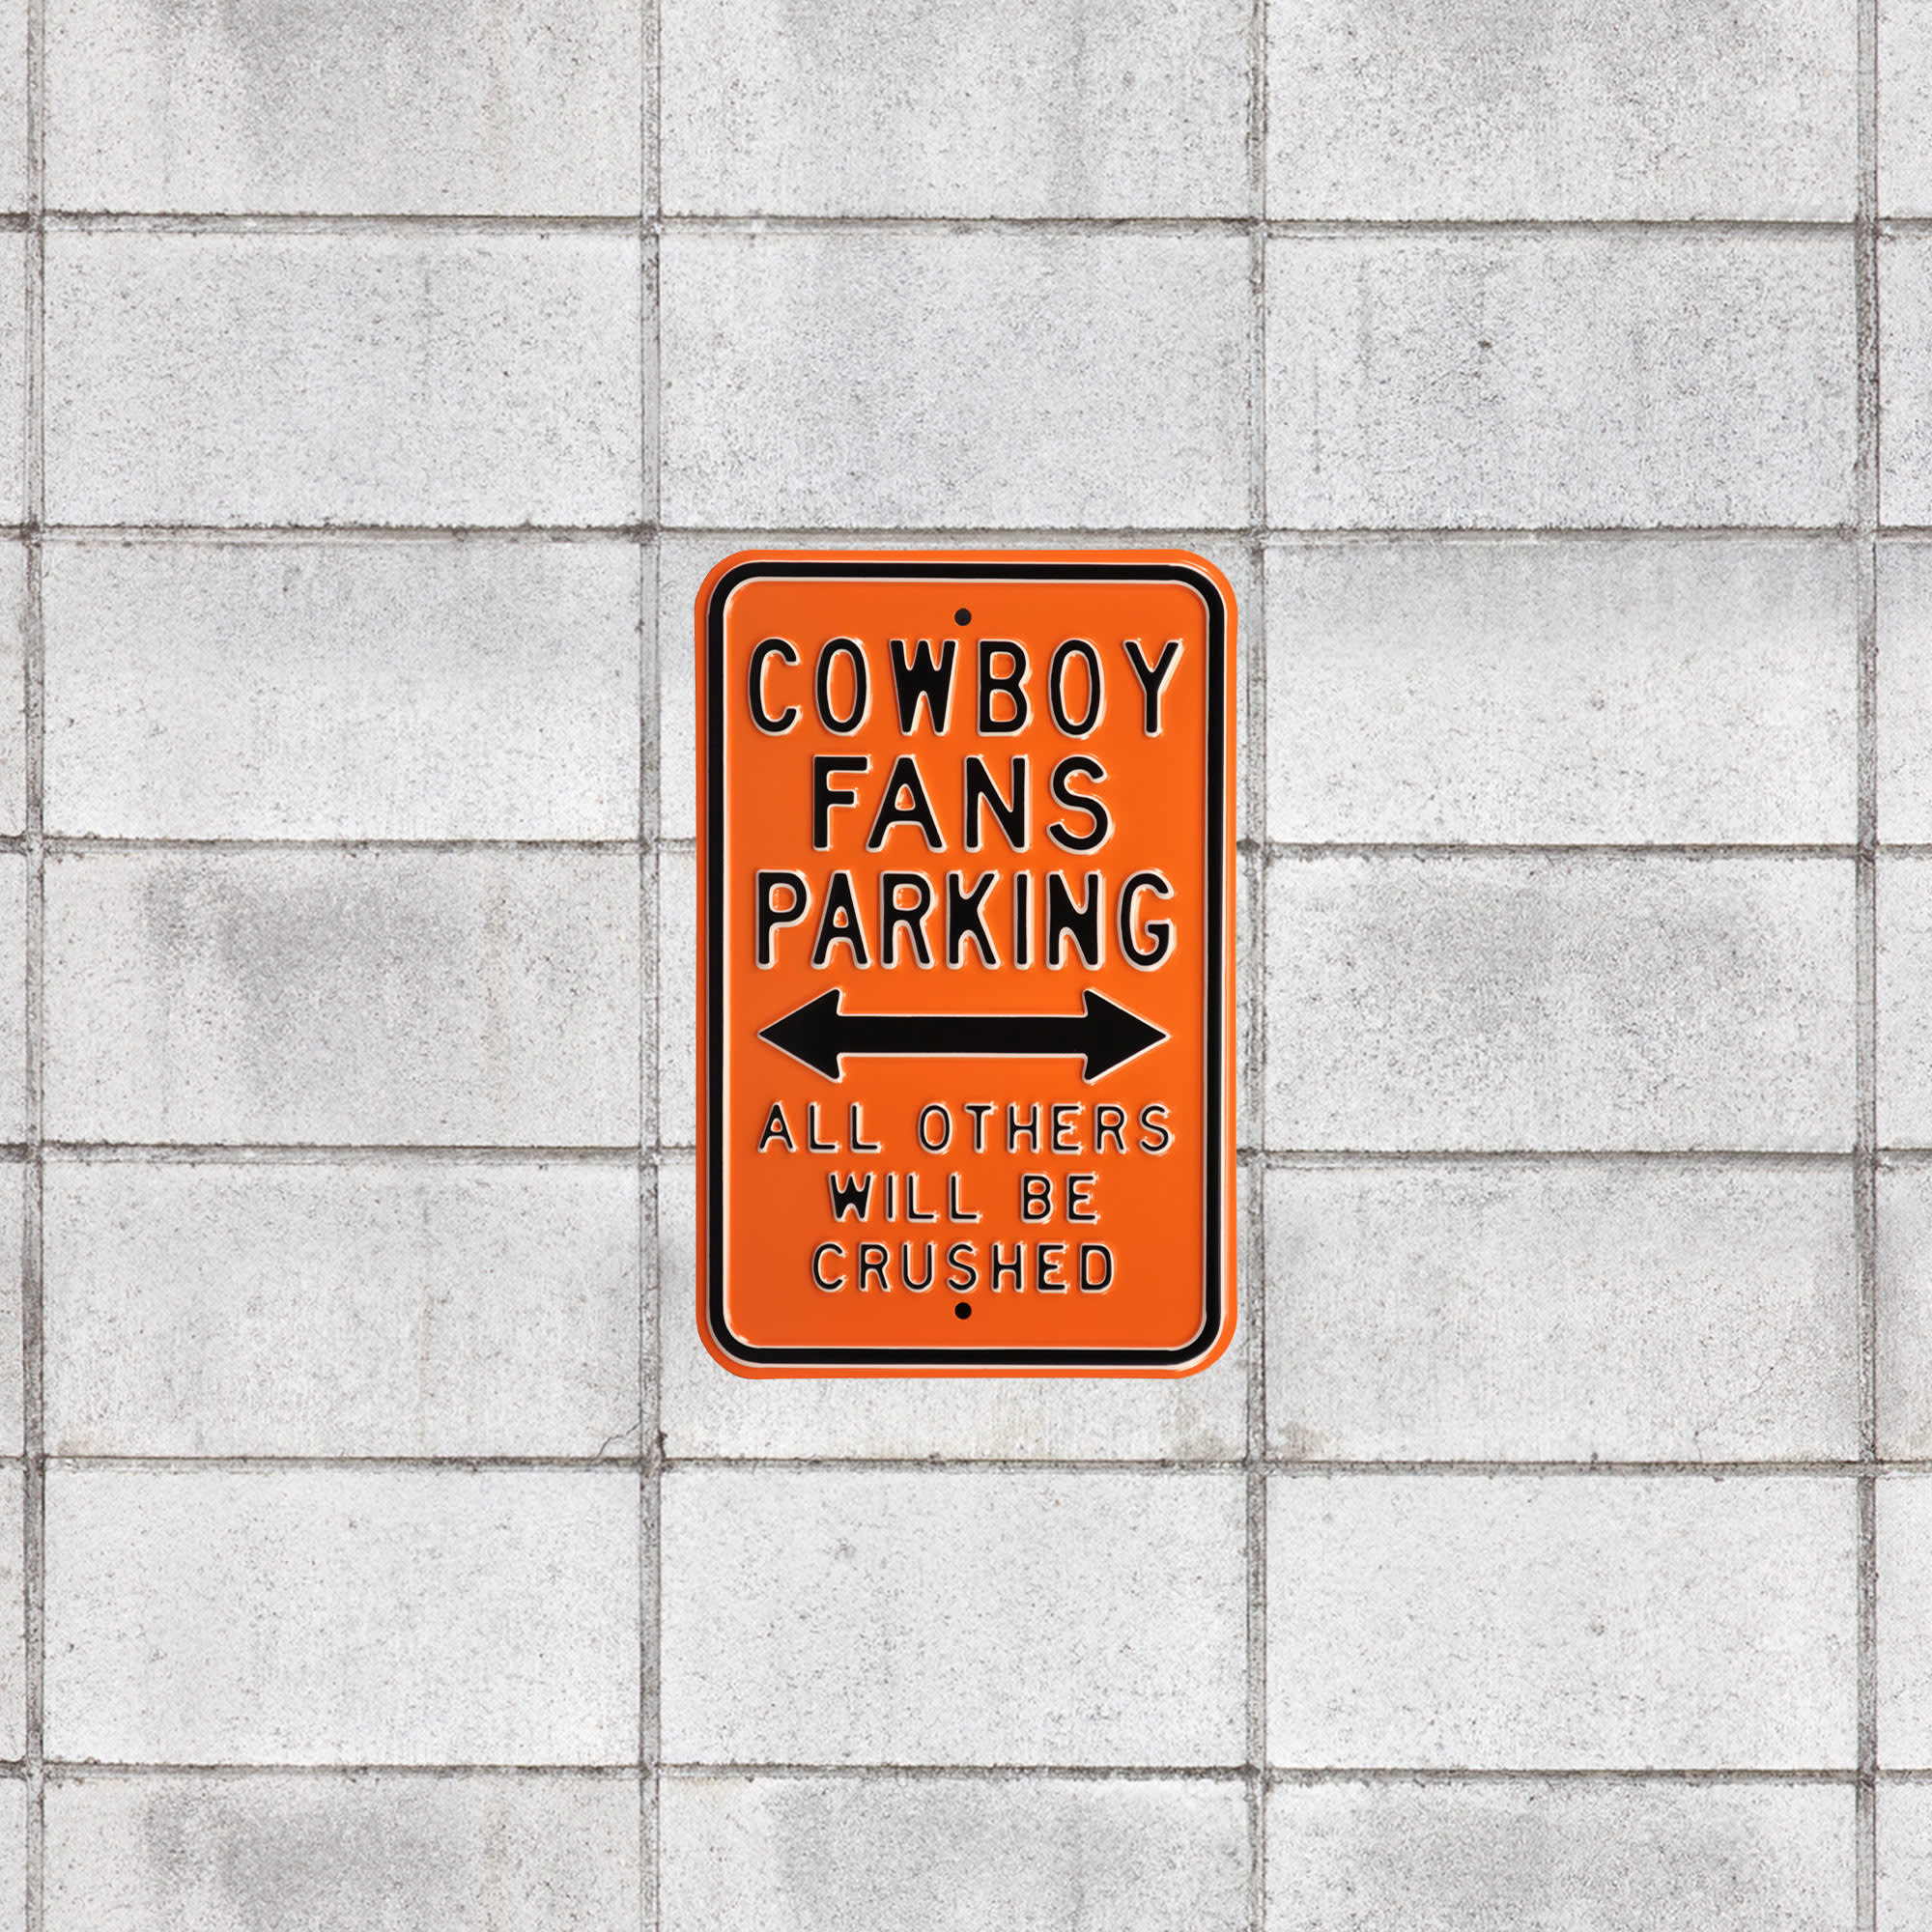 Oklahoma State Cowboys: Crushed Parking - Officially Licensed Metal Street Sign 18.0"W x 12.0"H by Fathead | 100% Steel